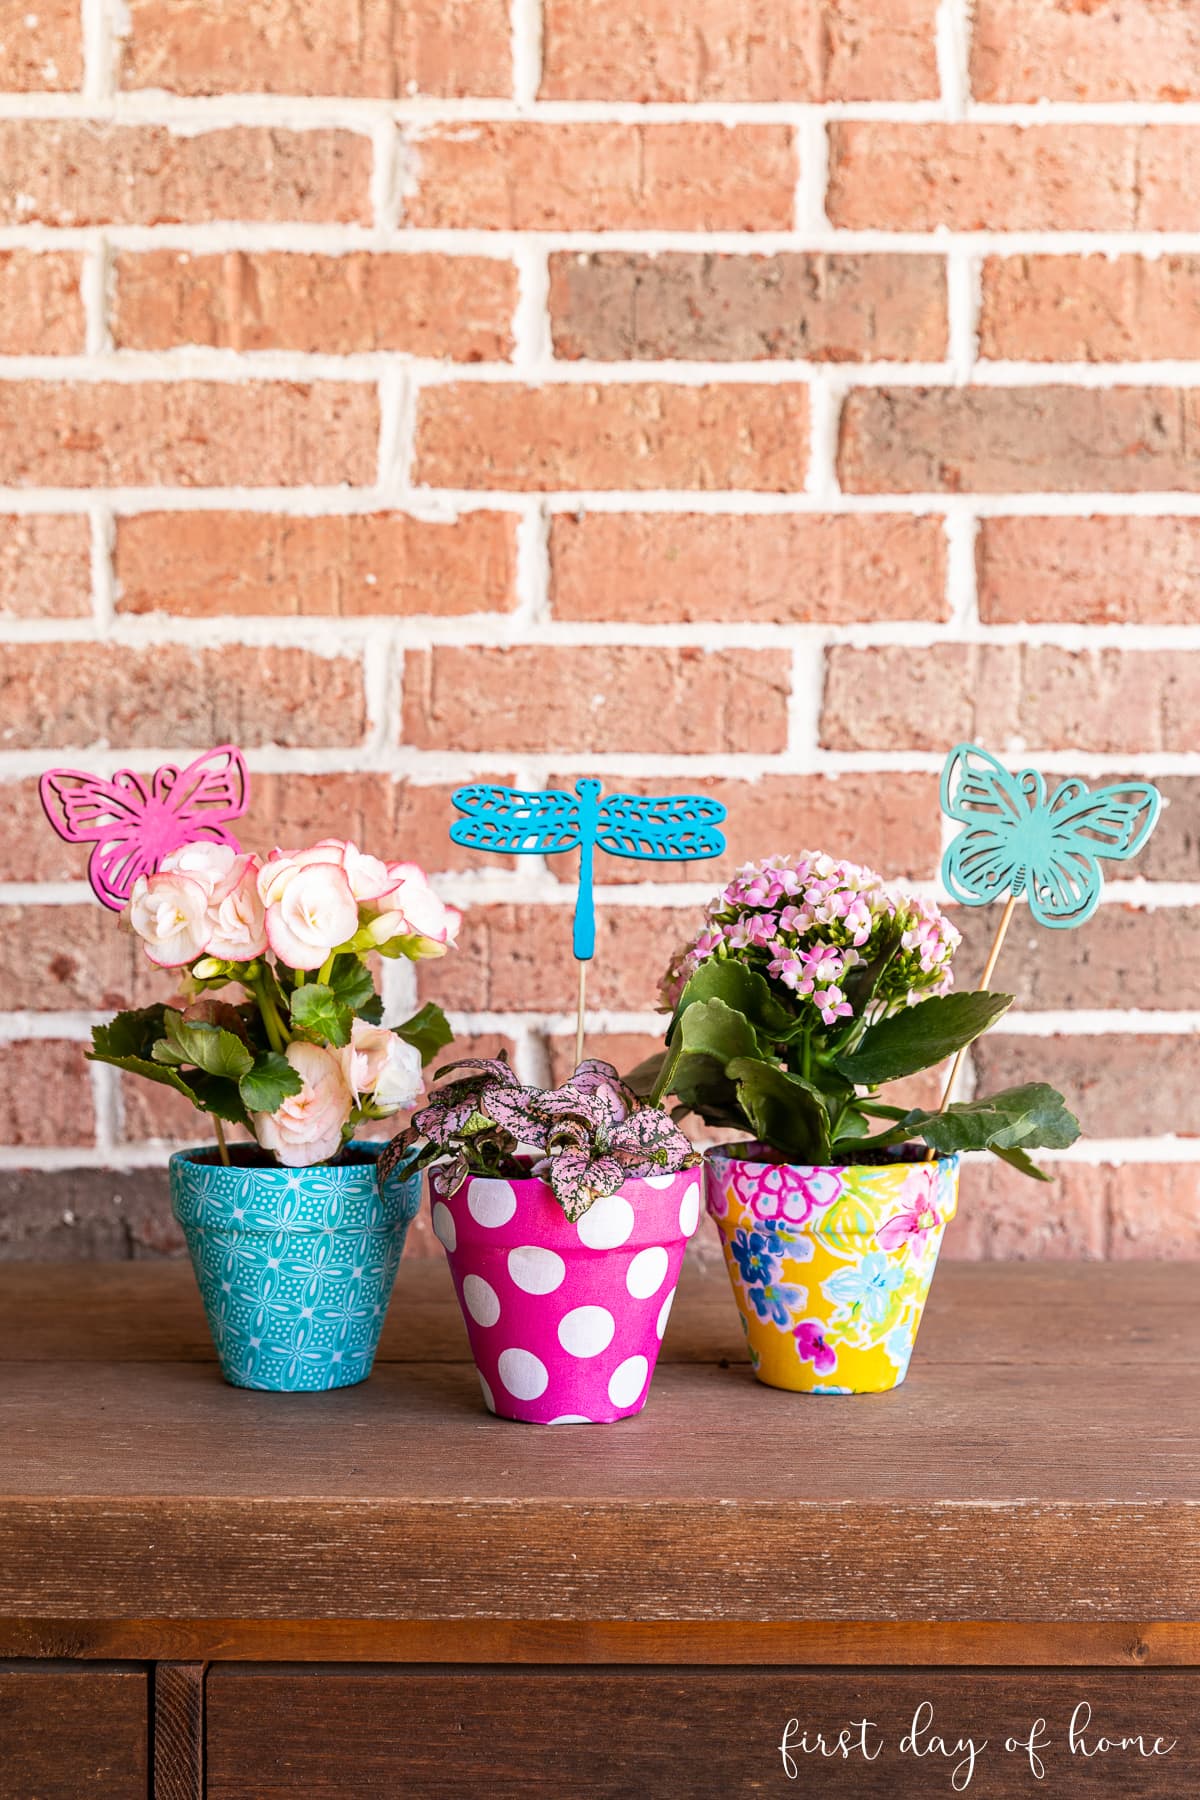 Trio of brightly colored fabric covered flower pots shown with DIY garden stakes in front of brick wall